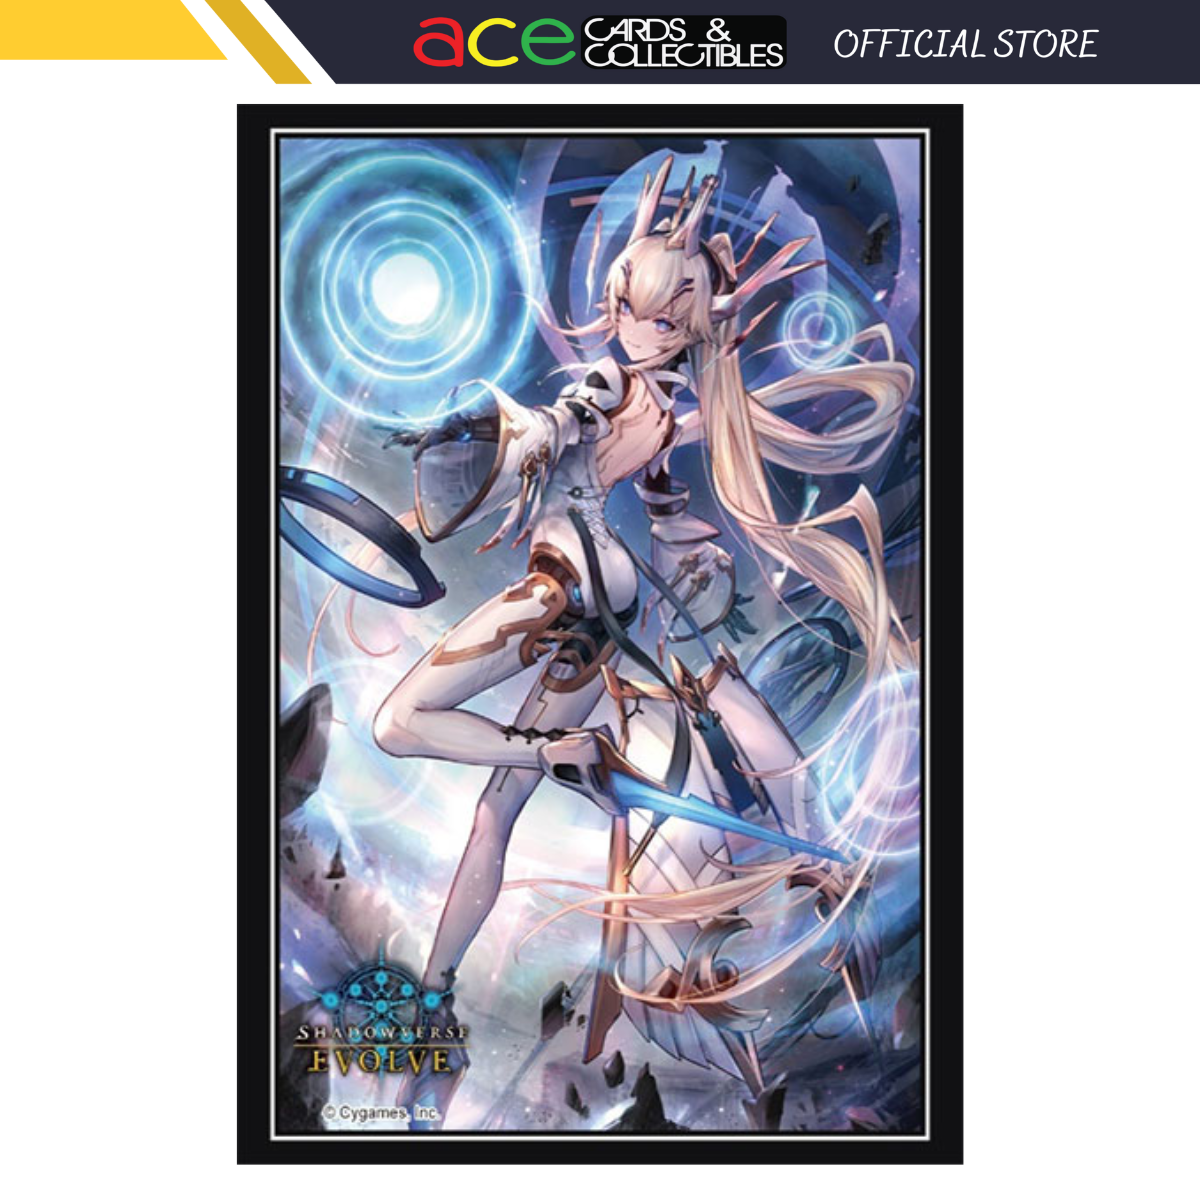 Shadowverse Evolve Official Sleeve “Technolord&quot; (Vol.108)-Shadowverse-Ace Cards &amp; Collectibles